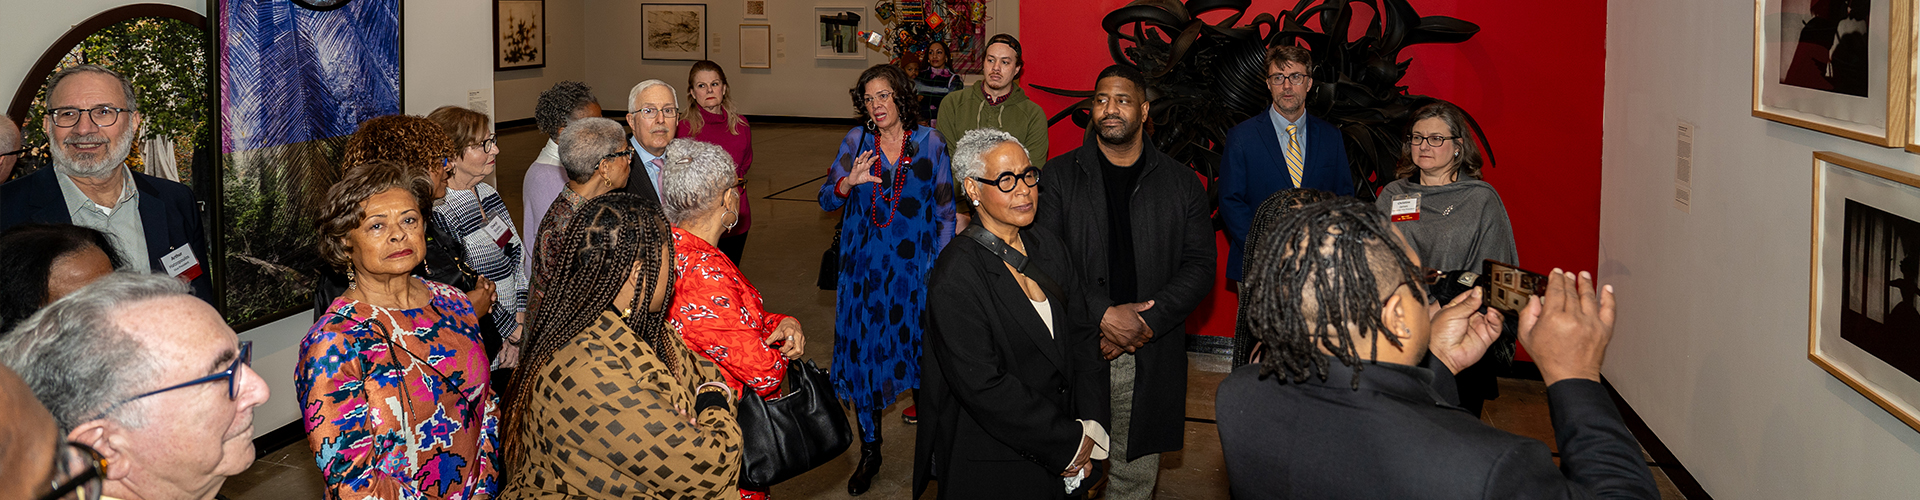 Visitors walking around Weston Gallery during the exhibition "Century: 100 Years of Black Art at MAM"